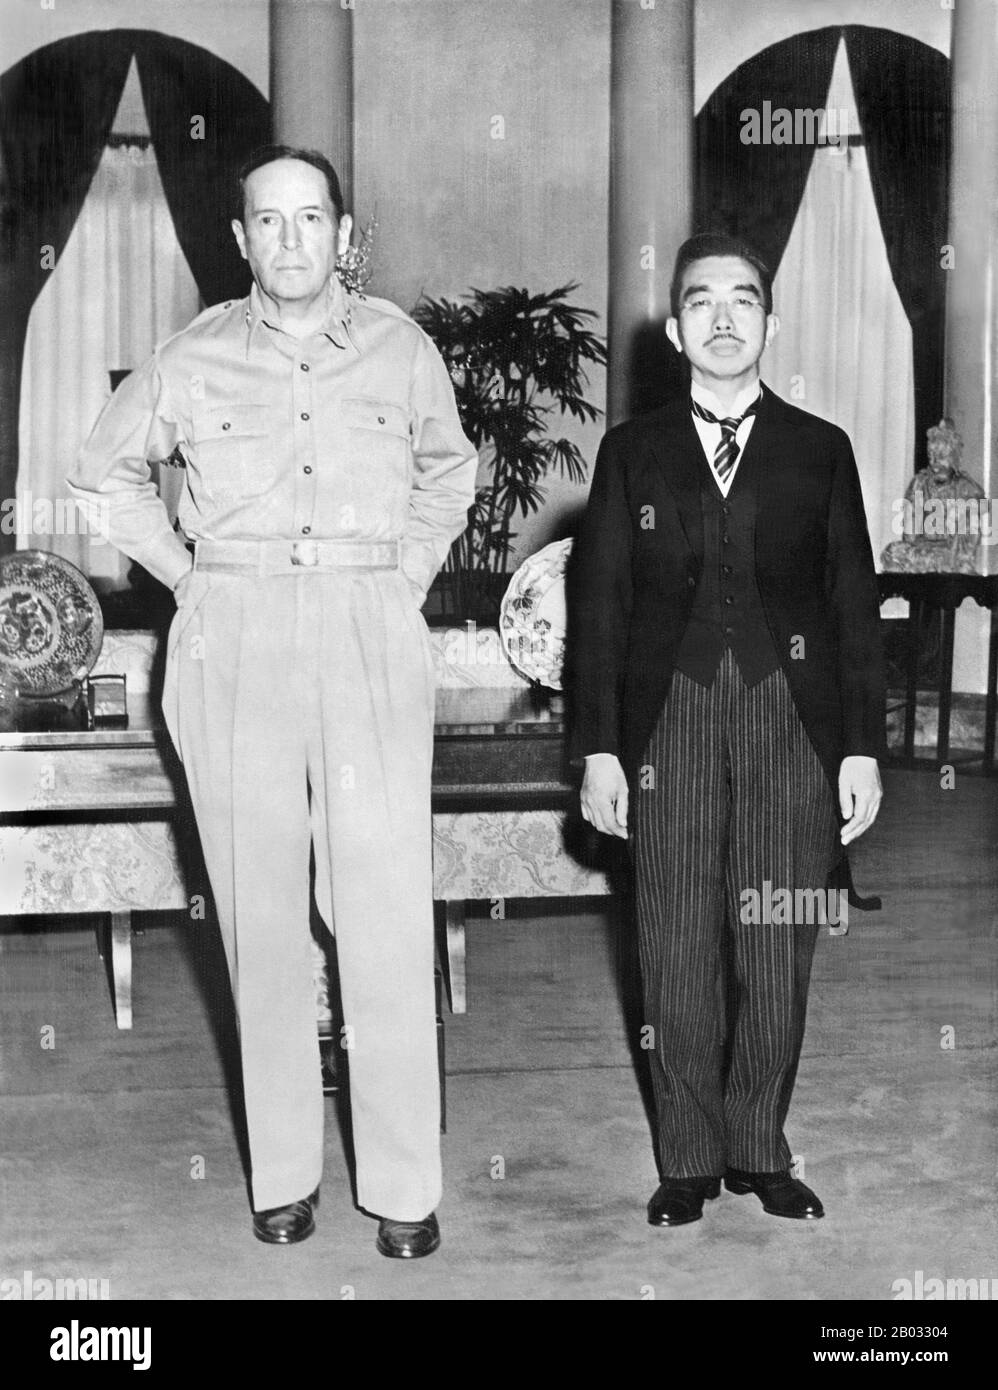 On September 27, 1945, Emperor Hirohito paid a visit to US Army General Douglas MacArthur at the United States Embassy in Tokyo.  Except for the Emperor's personal translator (he spoke the Imperial Dialect of Japanese, which was difficult for native Japanese to understand) his entourage was politely, but effectively, shut out of the meeting. Stock Photo